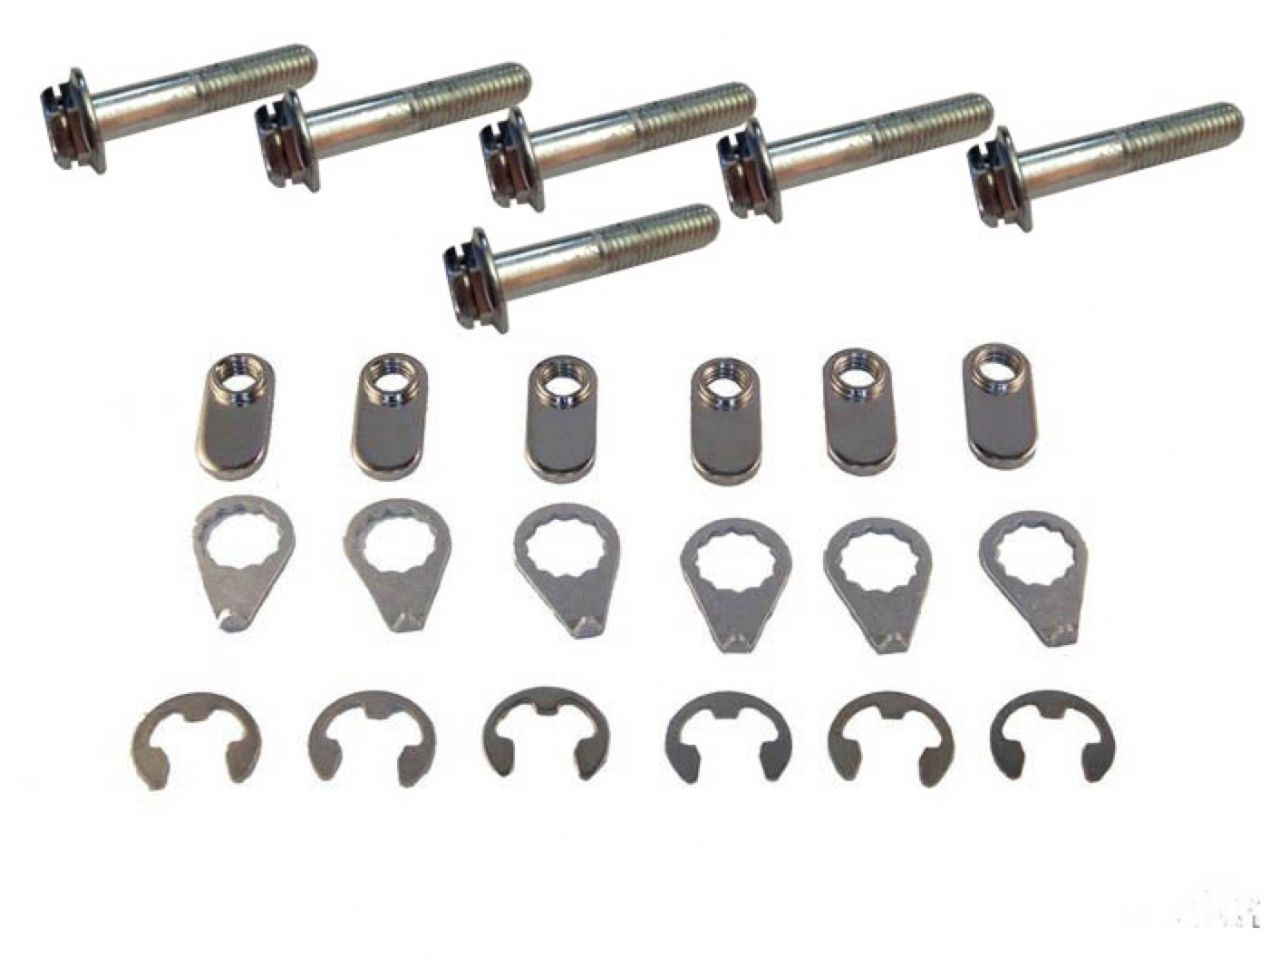 STAGE 8 Collector Kit with (6) 10mm - 1.50 X 50mm Flange Bolts